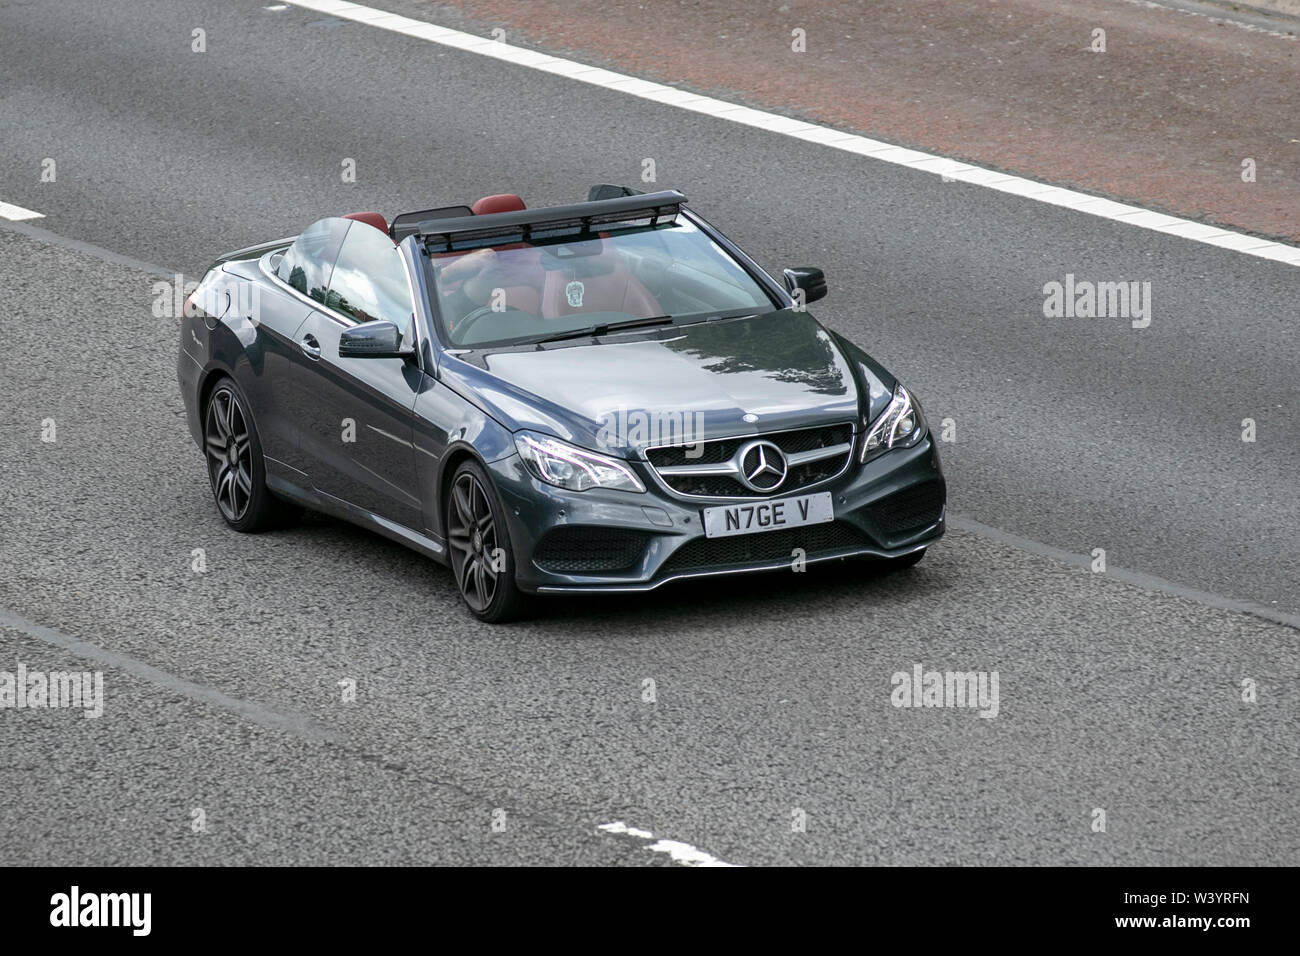 2015 Mercedes-Benz E220 AMG Line Bluetec AUT; UK Vehicular traffic, transport, with private number plate, personalised, cherished, dateless, DVLA registration marks, registrations,modern saloon cars, south-bound on the 3 lane M6 motorway highway. Stock Photo